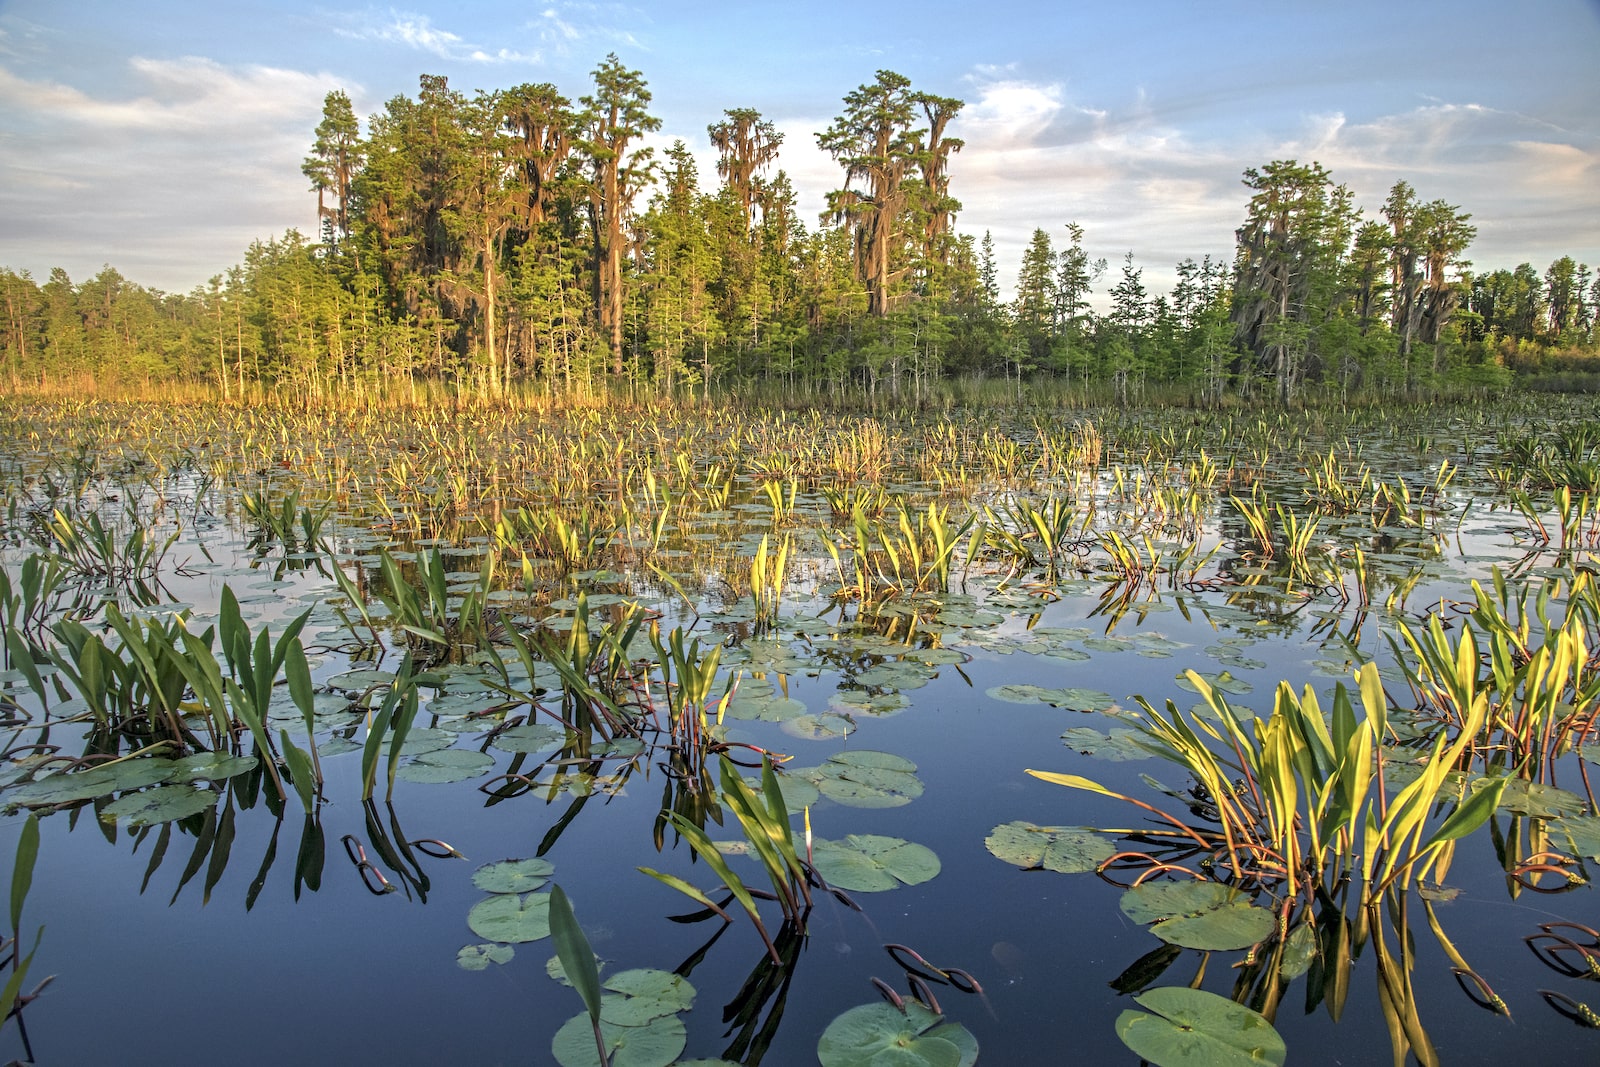 lily pads float on a large body of water near a grove of cypress trees